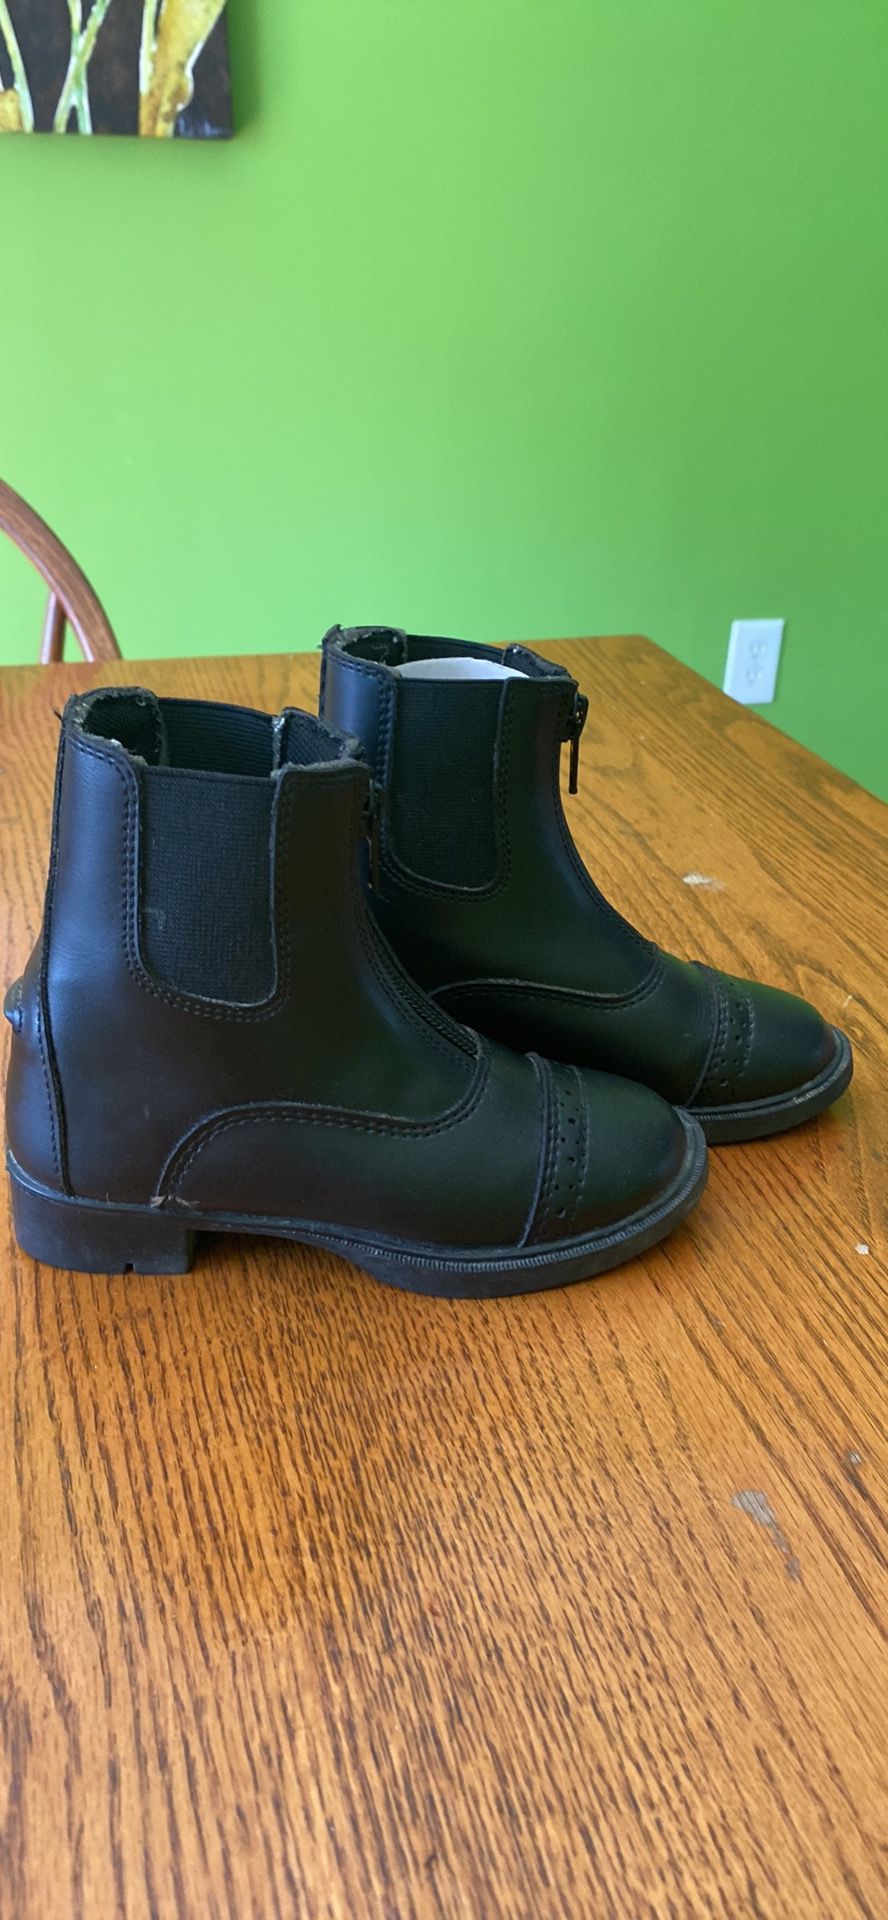 Girl’s Leather Boots-size 8